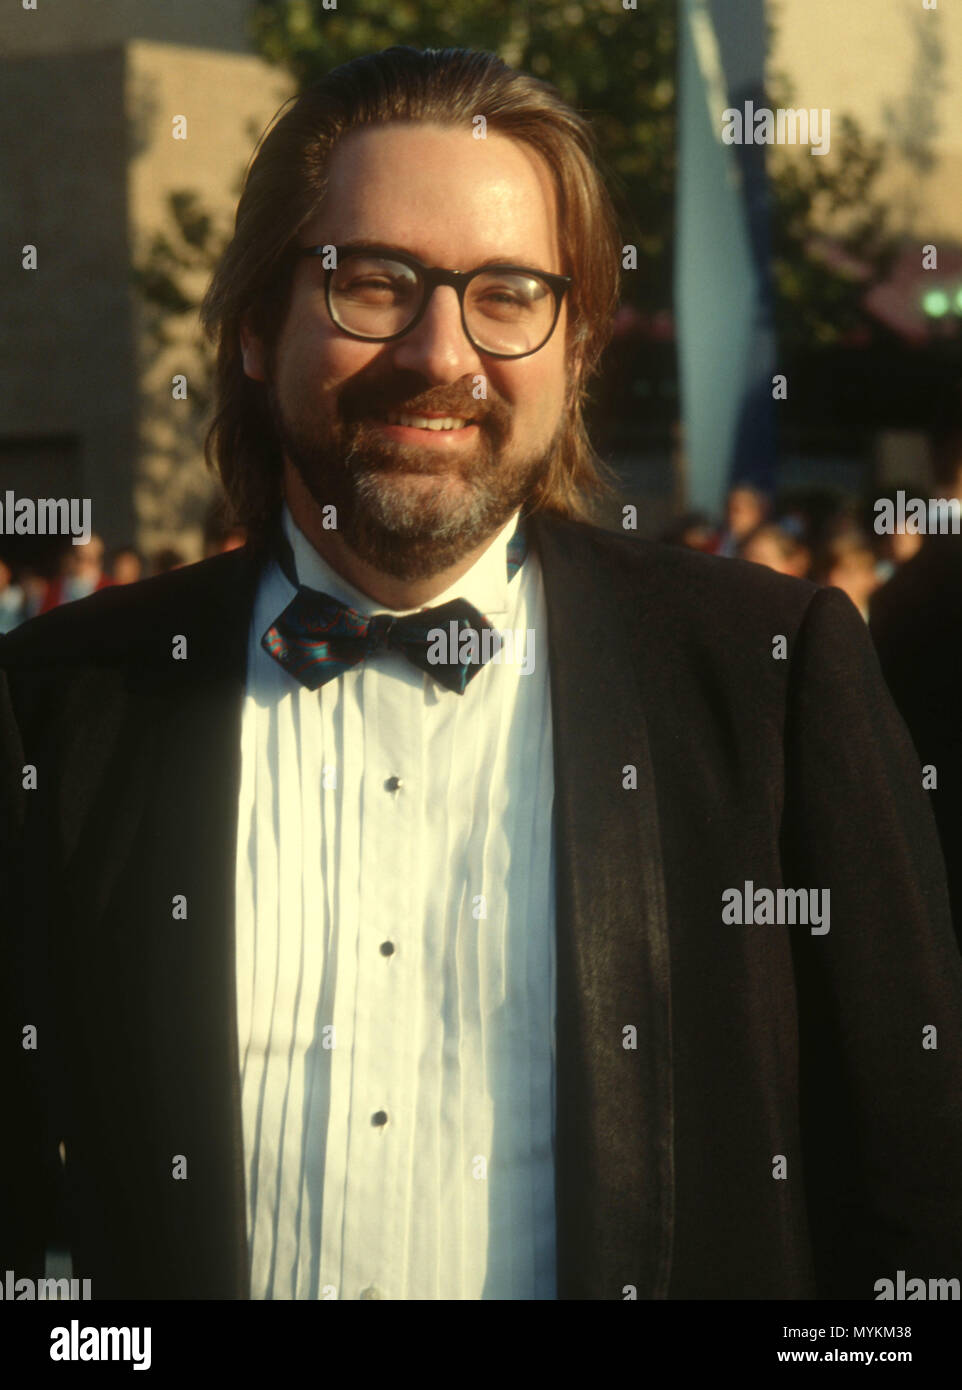 PASADENA, CA - AUGUST 25: Cartoonist/writer/producer Matt Groening attends the 43rd Annual Primetime Emmy Awards on August 25, 1991 at Pasadena Civic Auditorium in Pasadena, California. Photo by Barry King/Alamy Stock Photo Stock Photo